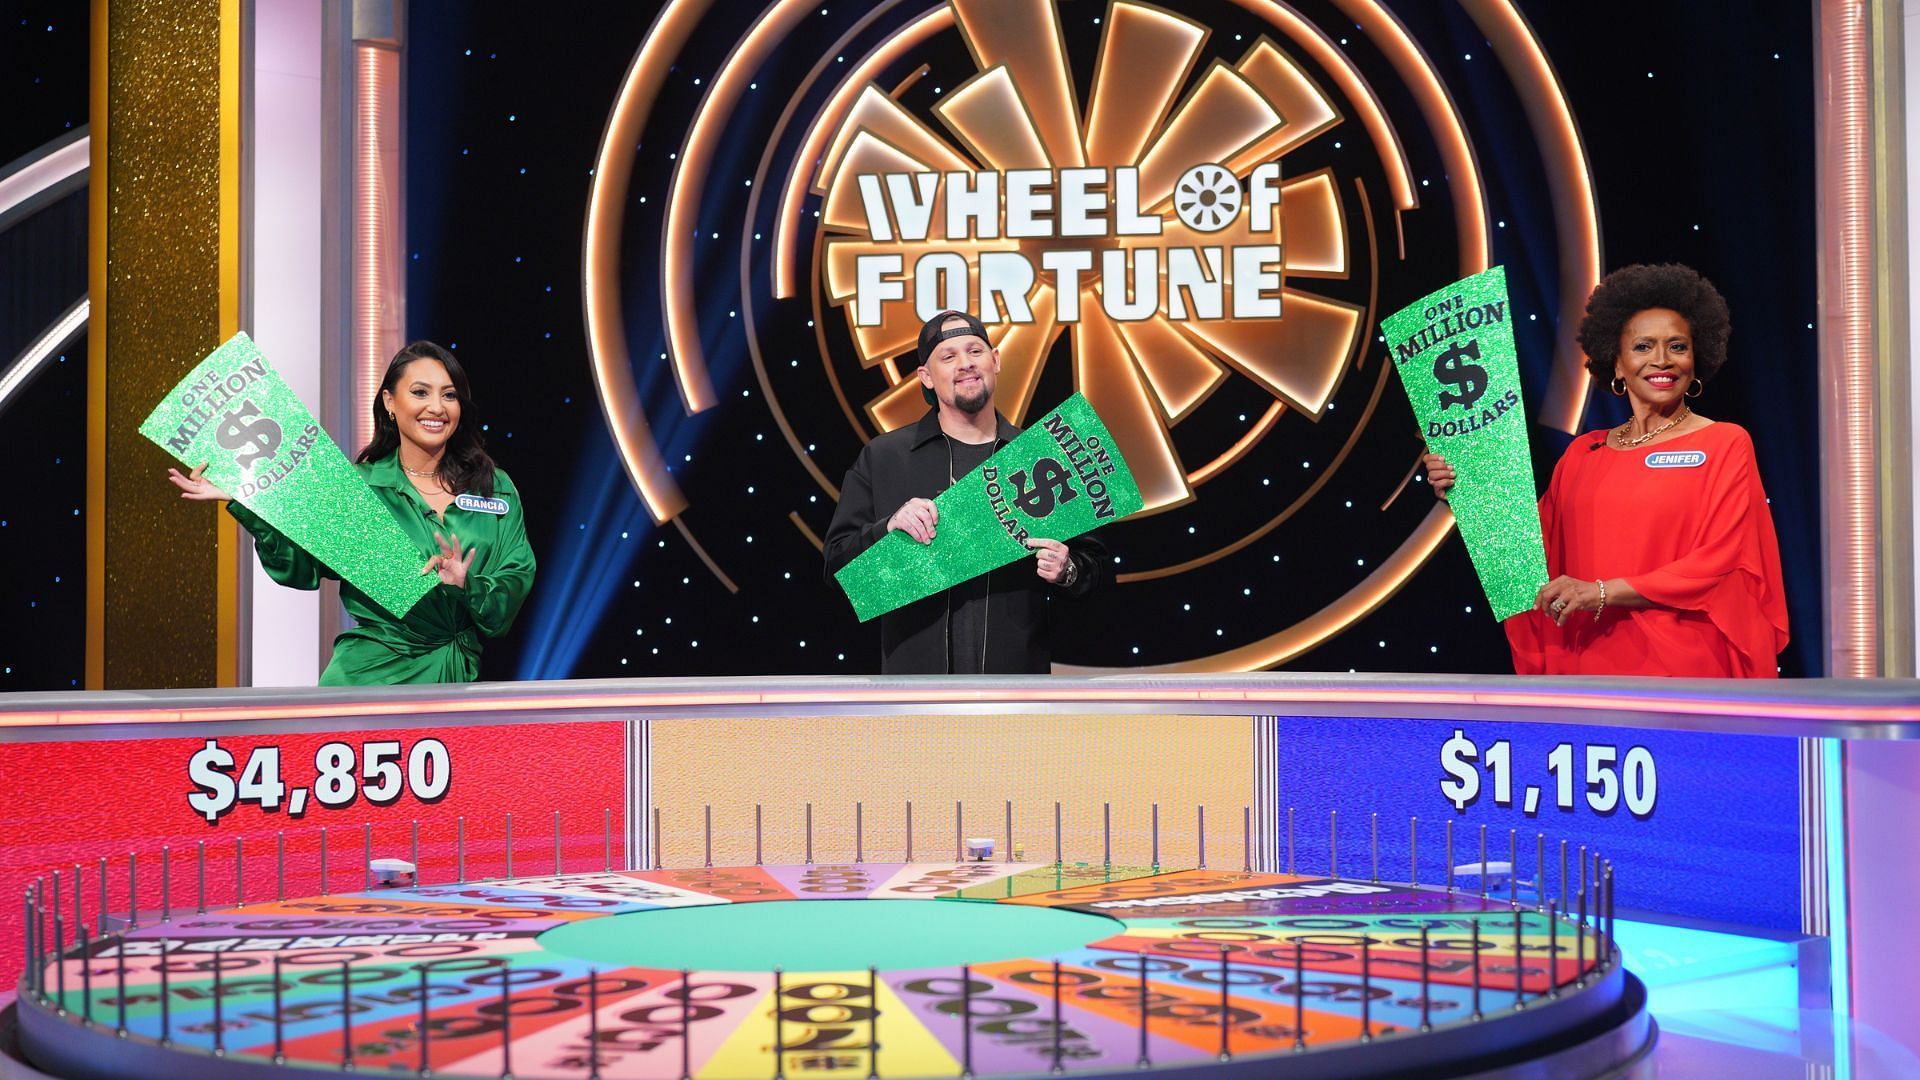 Celebrity Wheel of Fortune is all set to air a new episode this Sunday